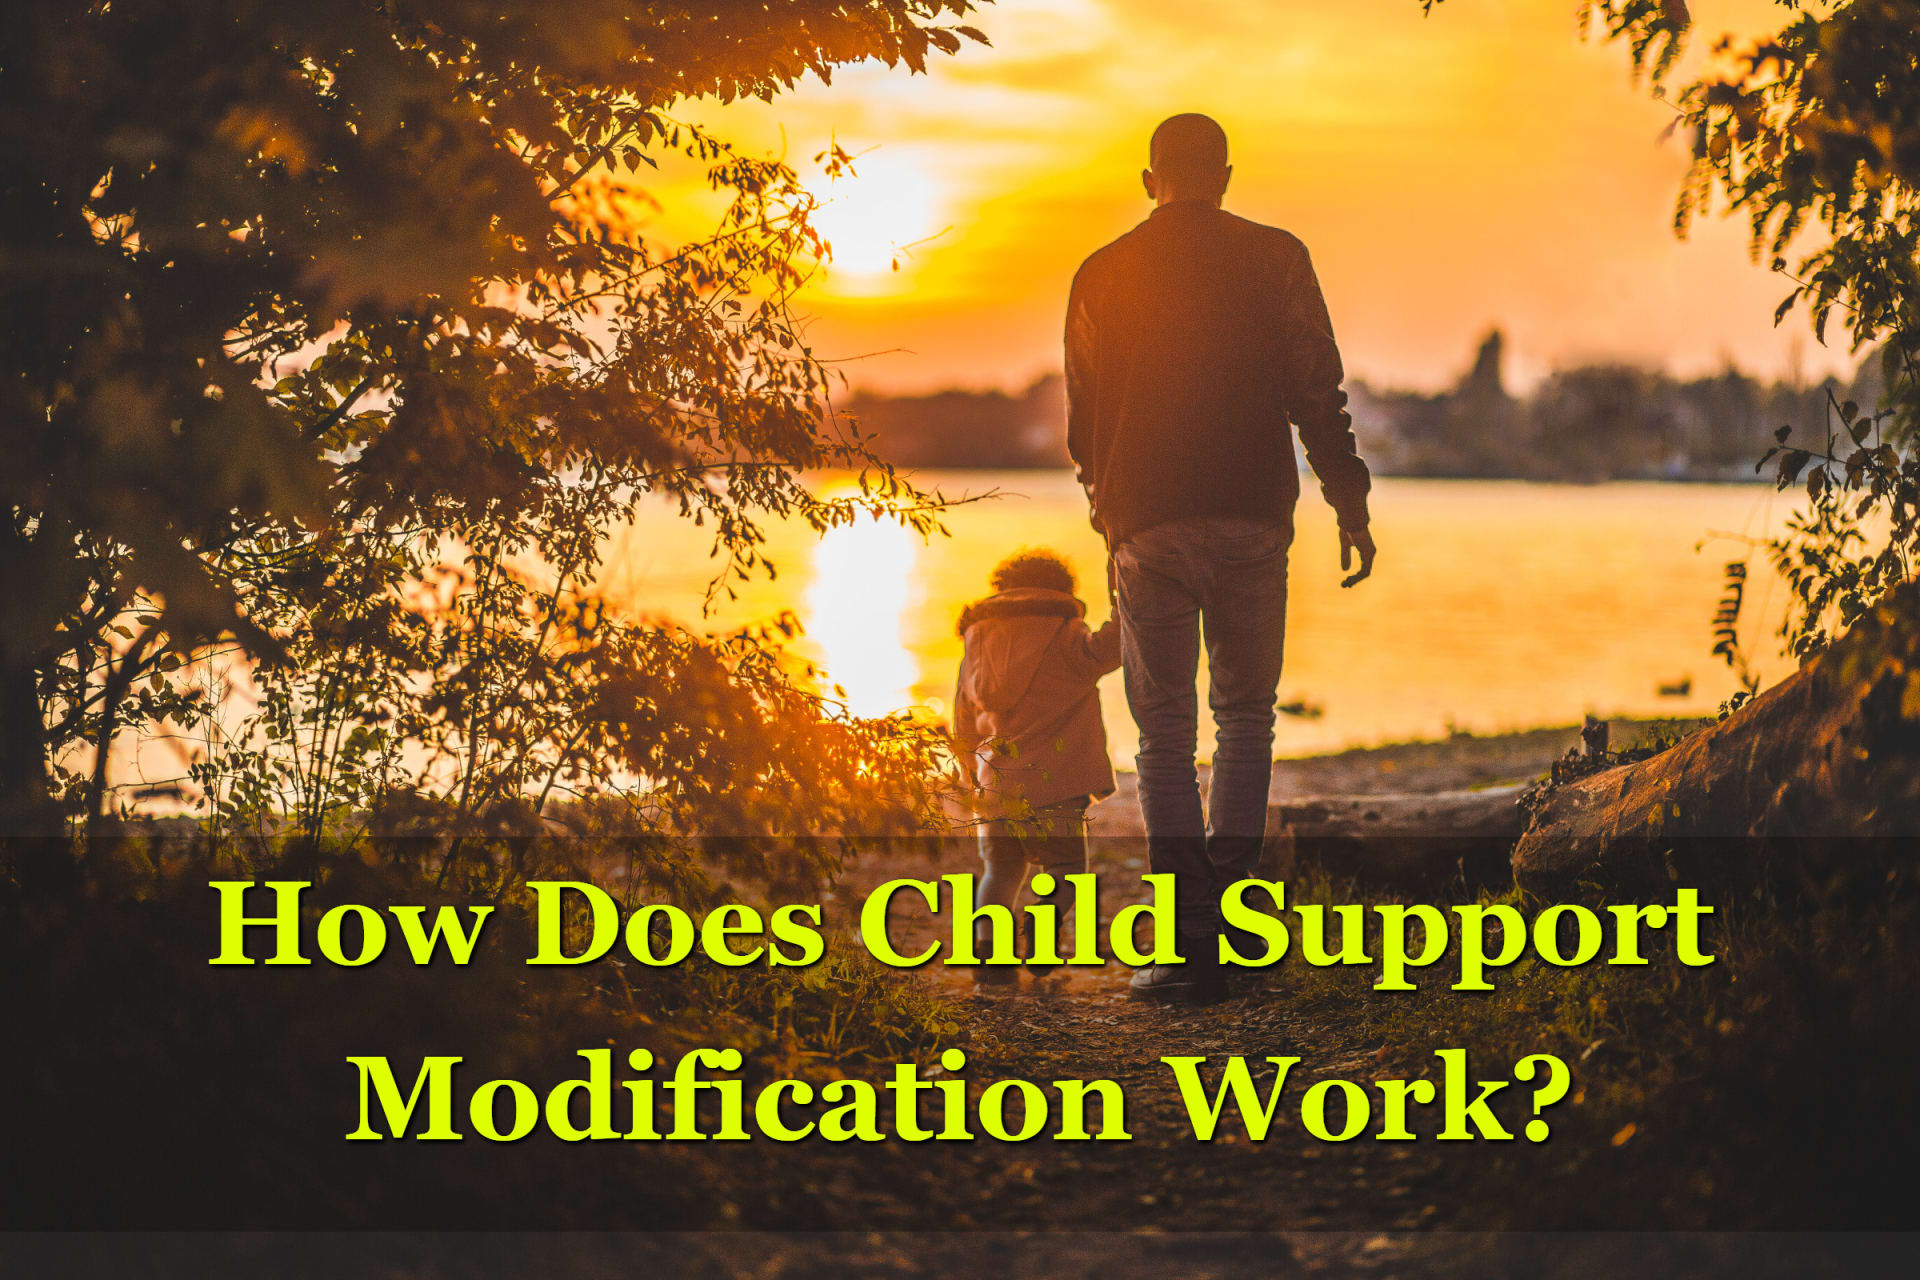 How Does Child Support Modification Work?